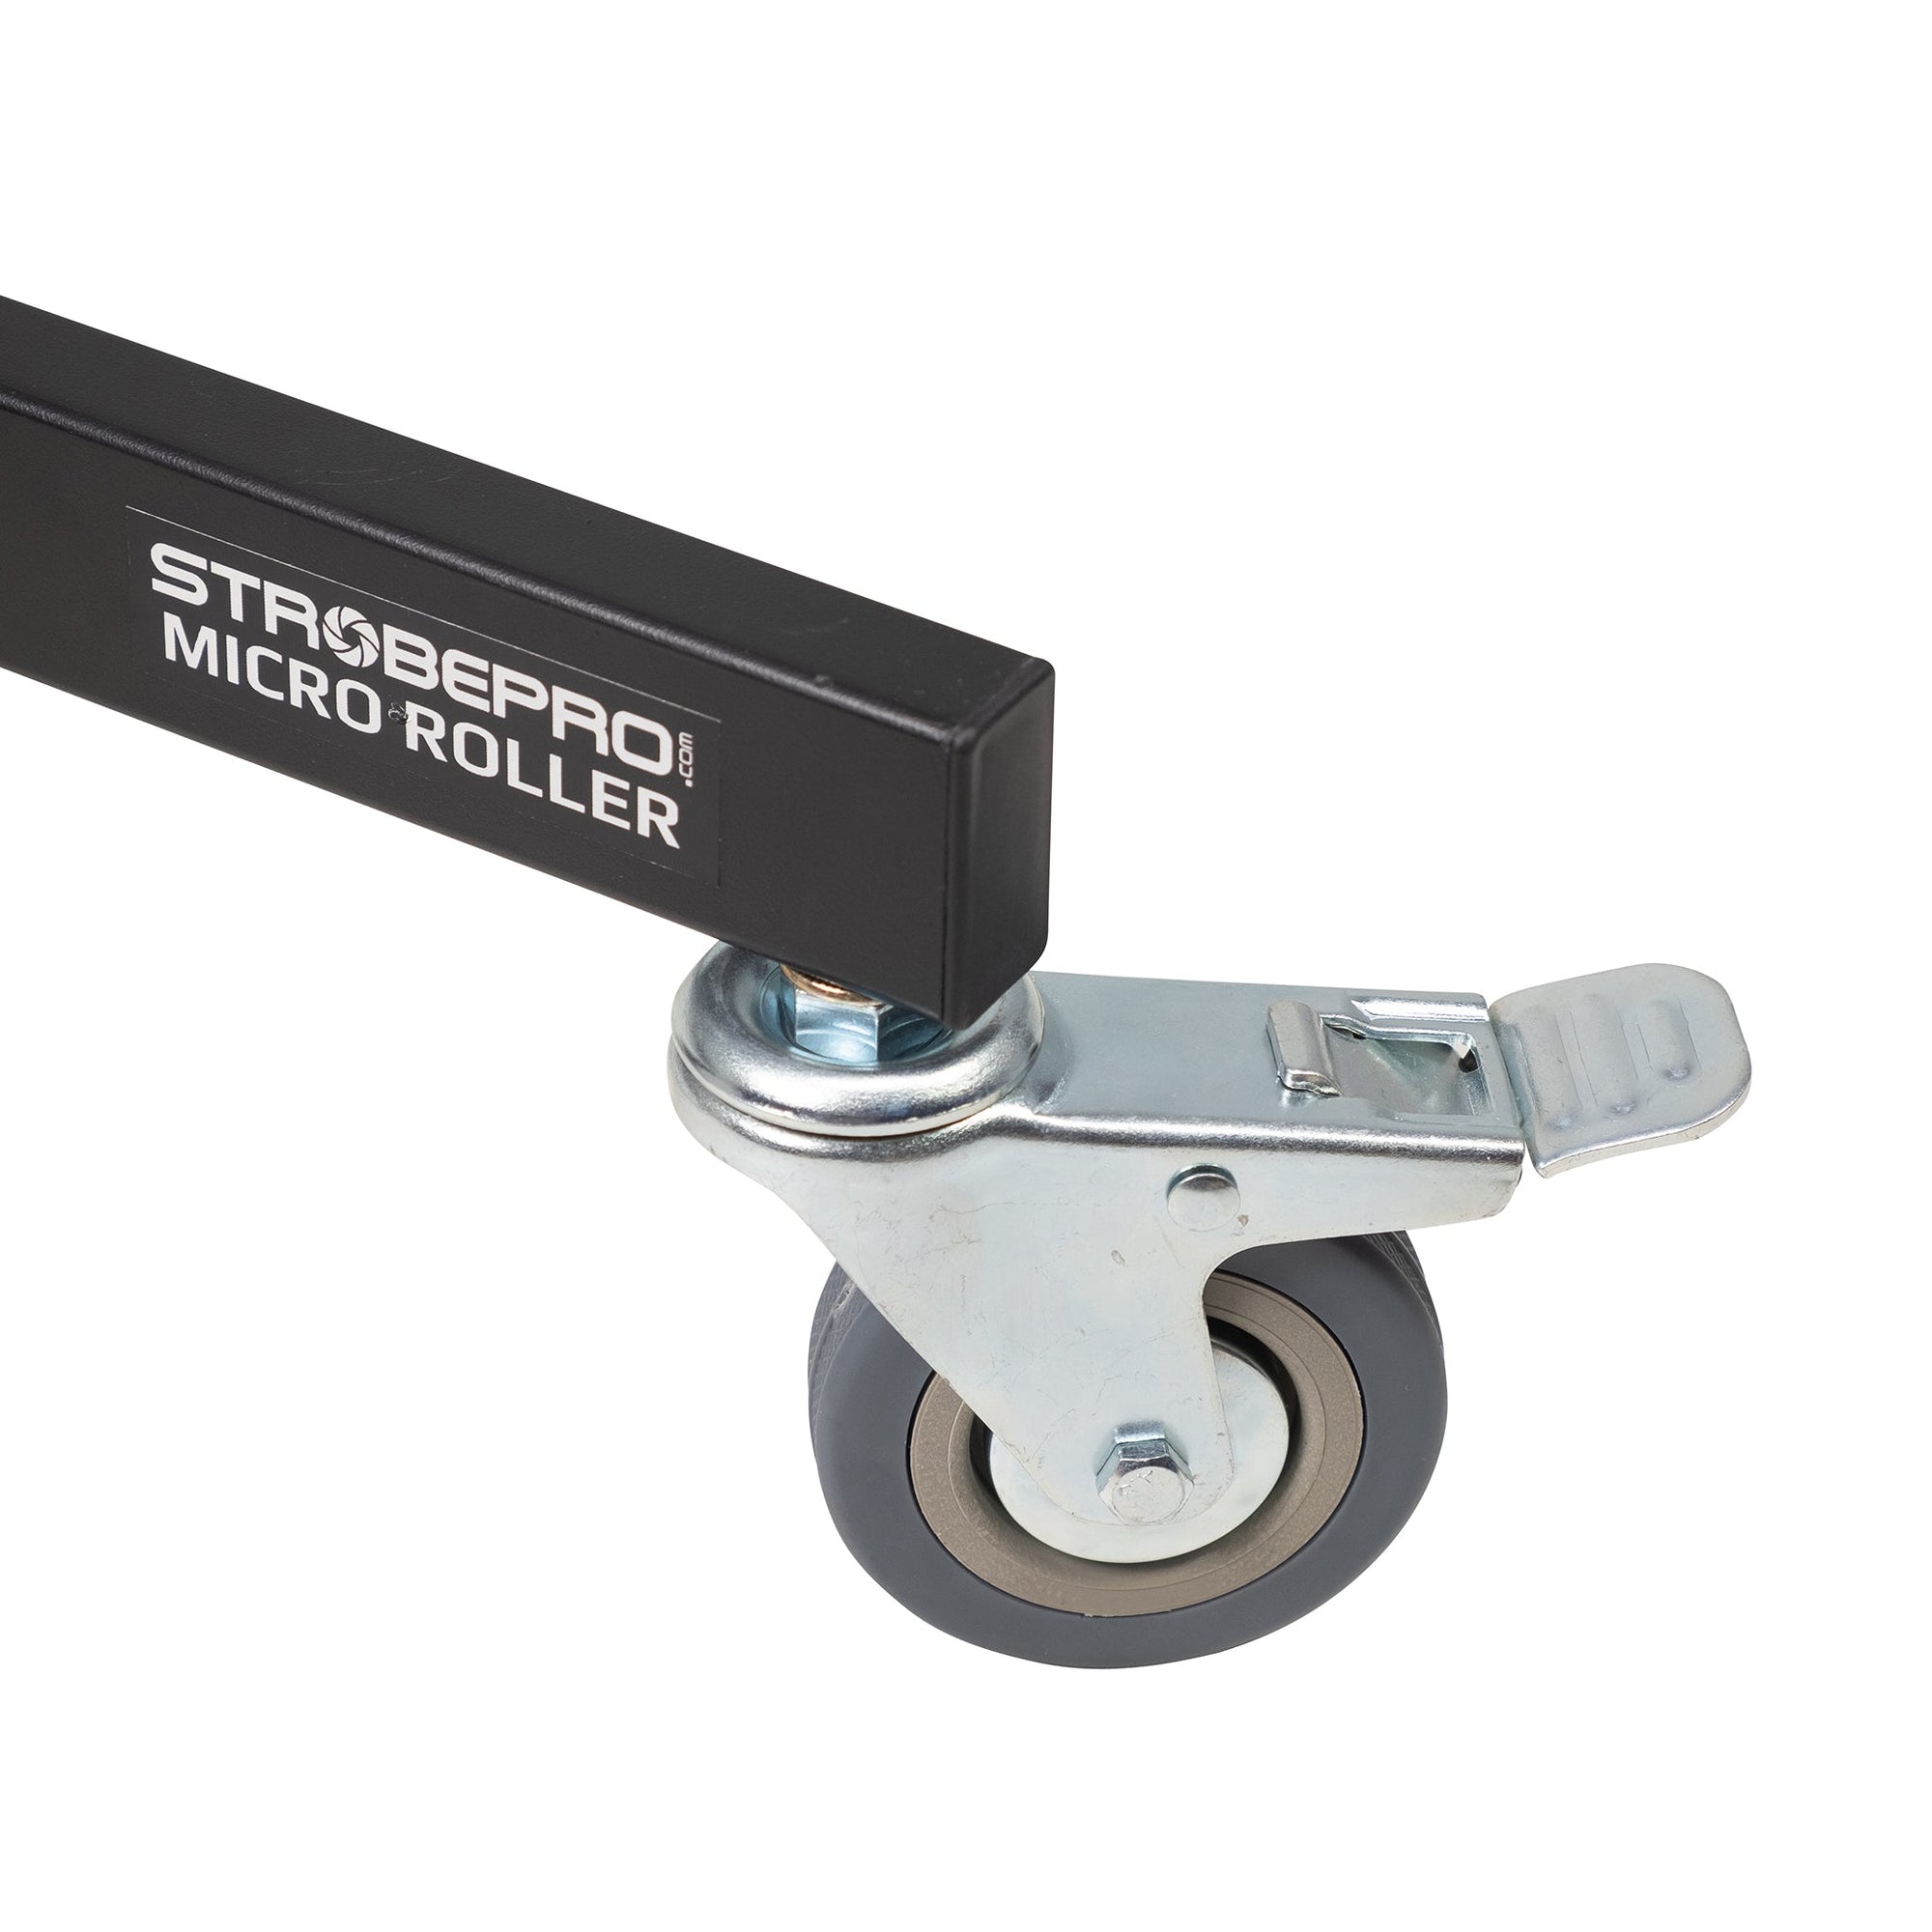 Strobepro Micro Roller Stand